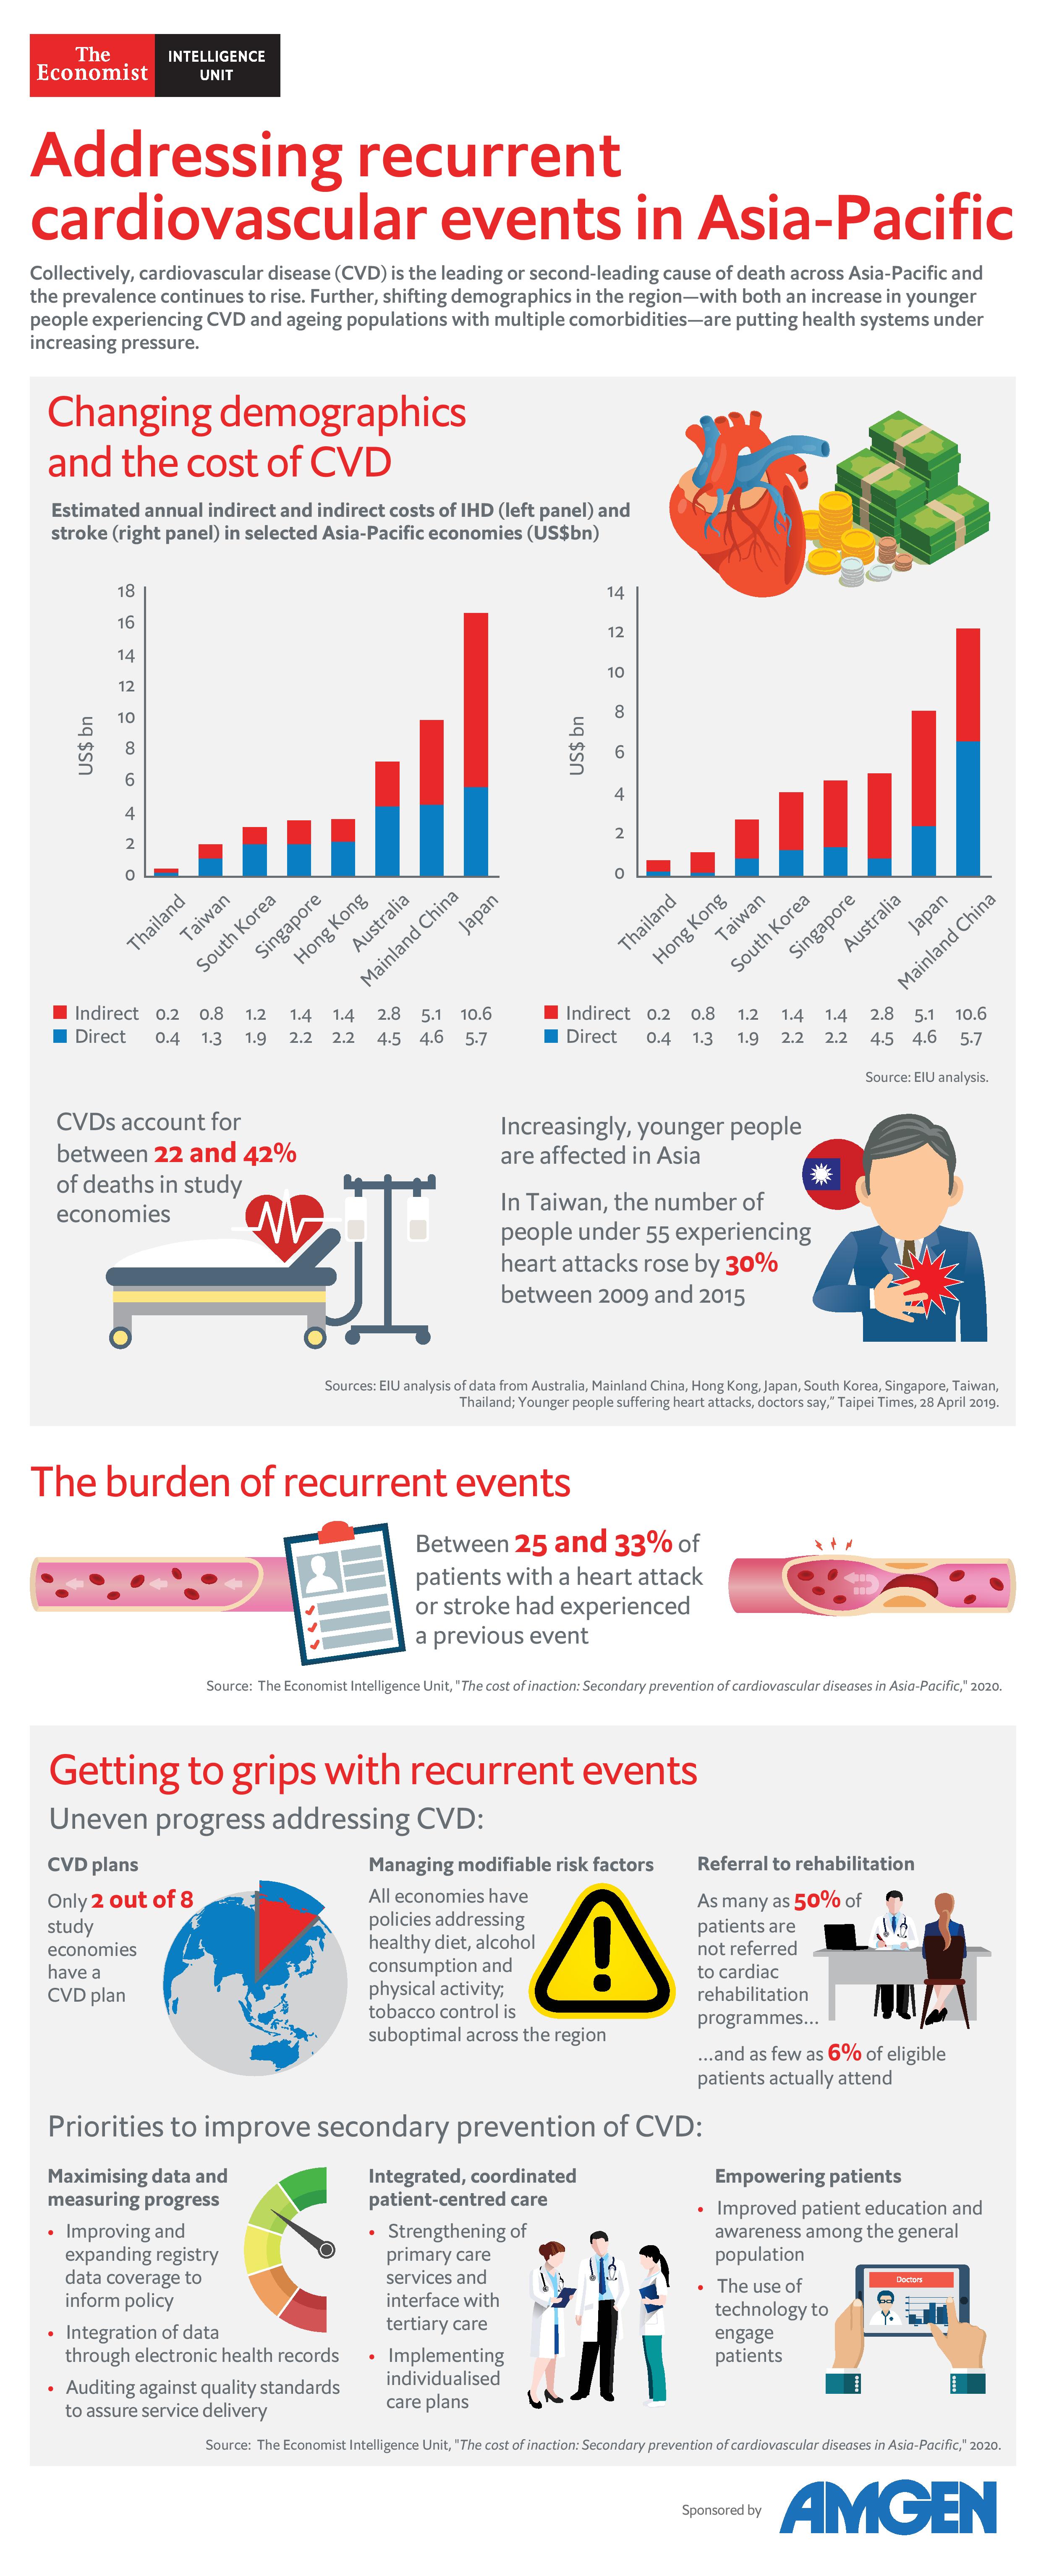 Addressing recurrent cardiovascular events in Asia-Pacific